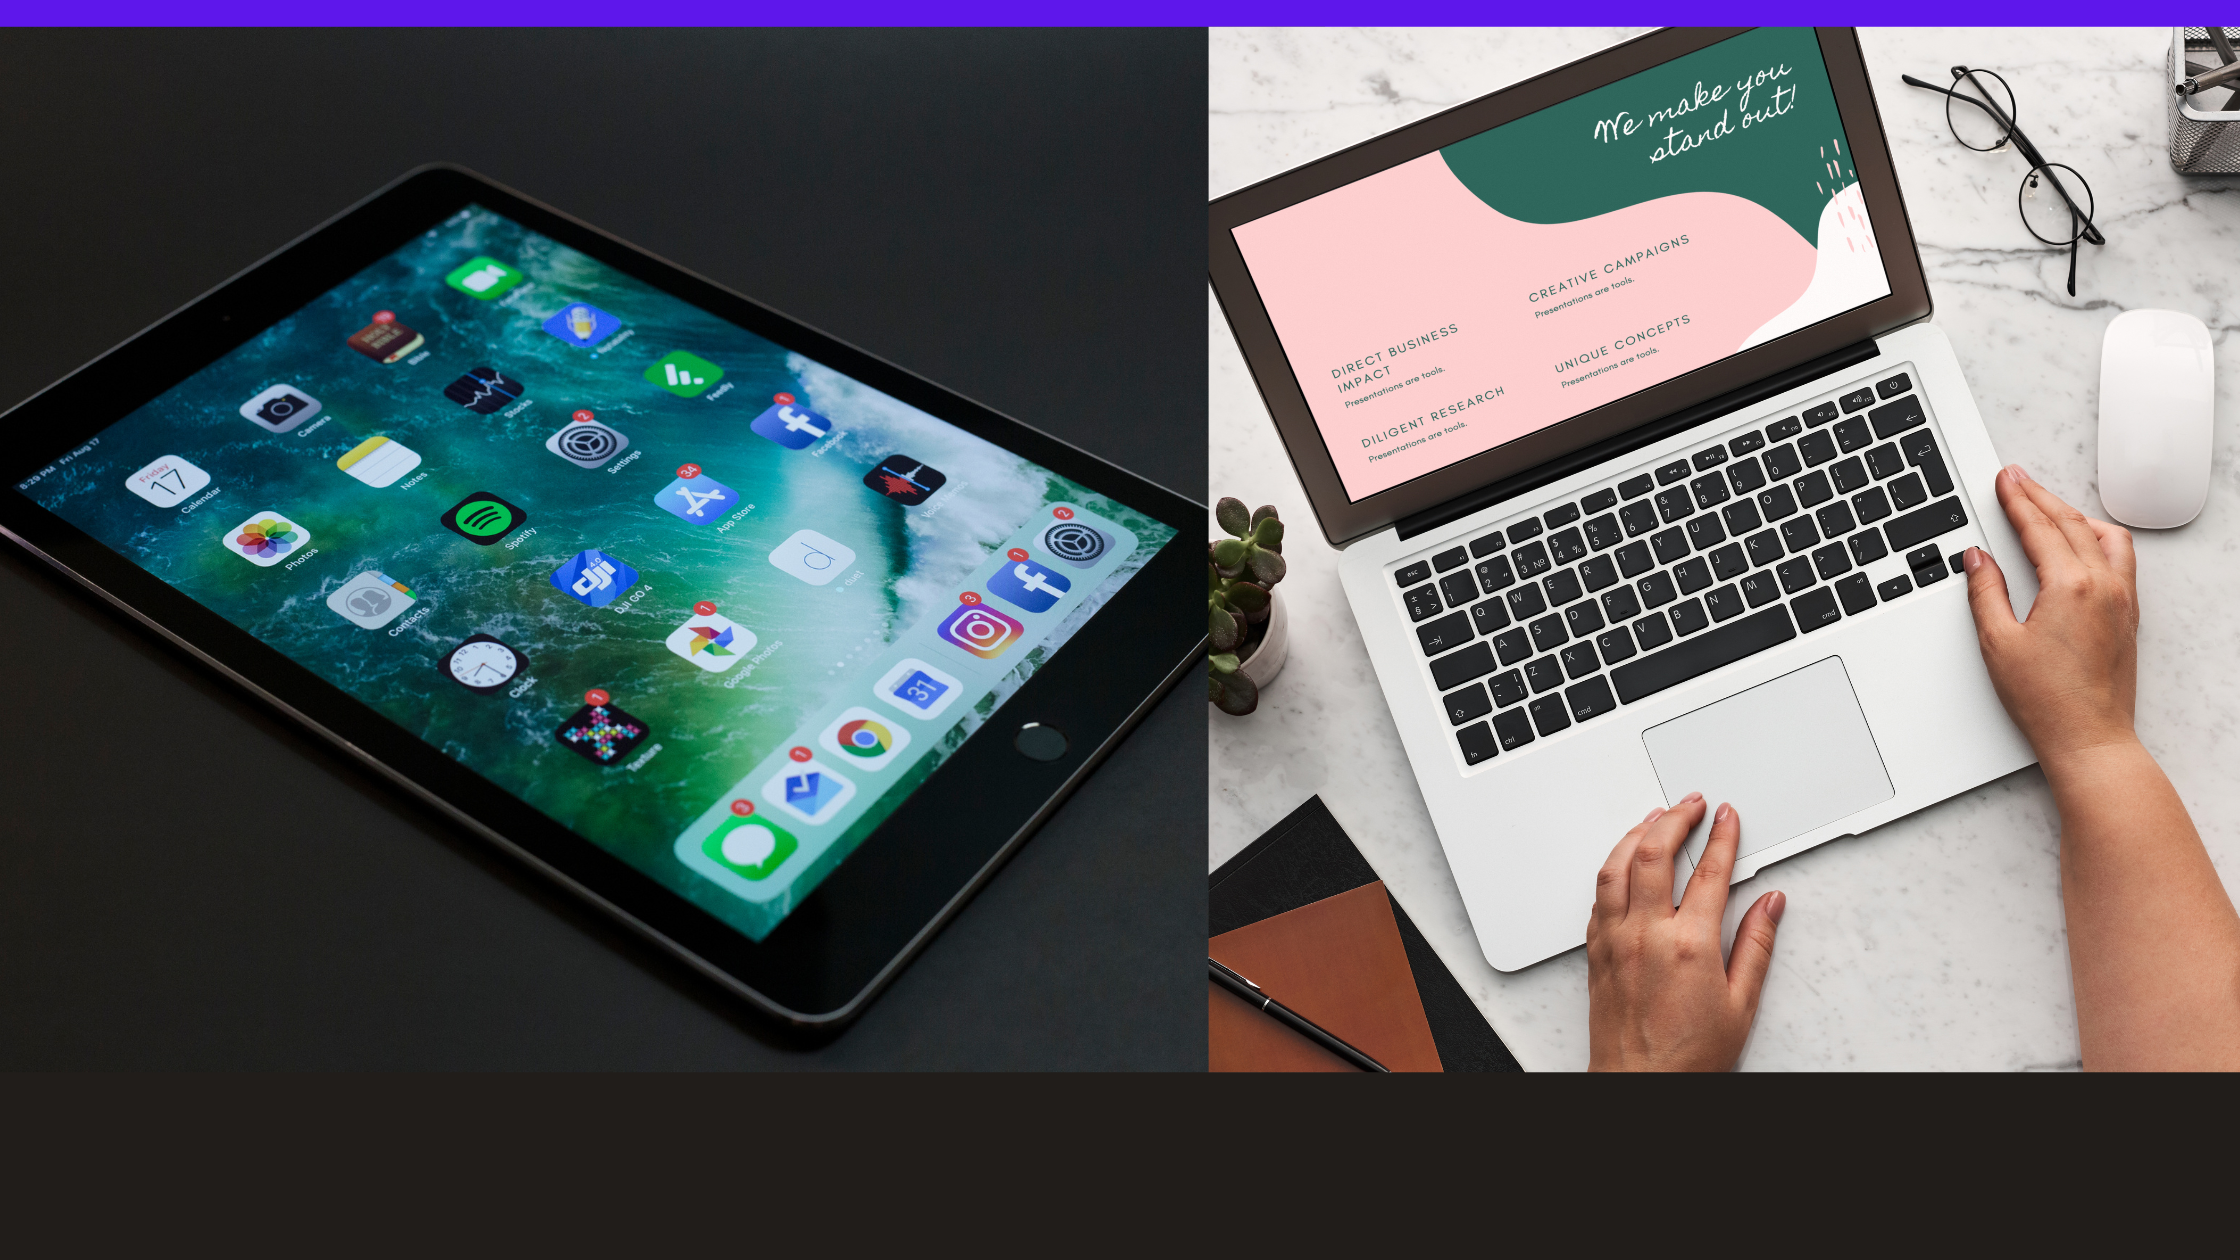 iPad or Laptop For School Students? (Exploring the Pros and Cons)